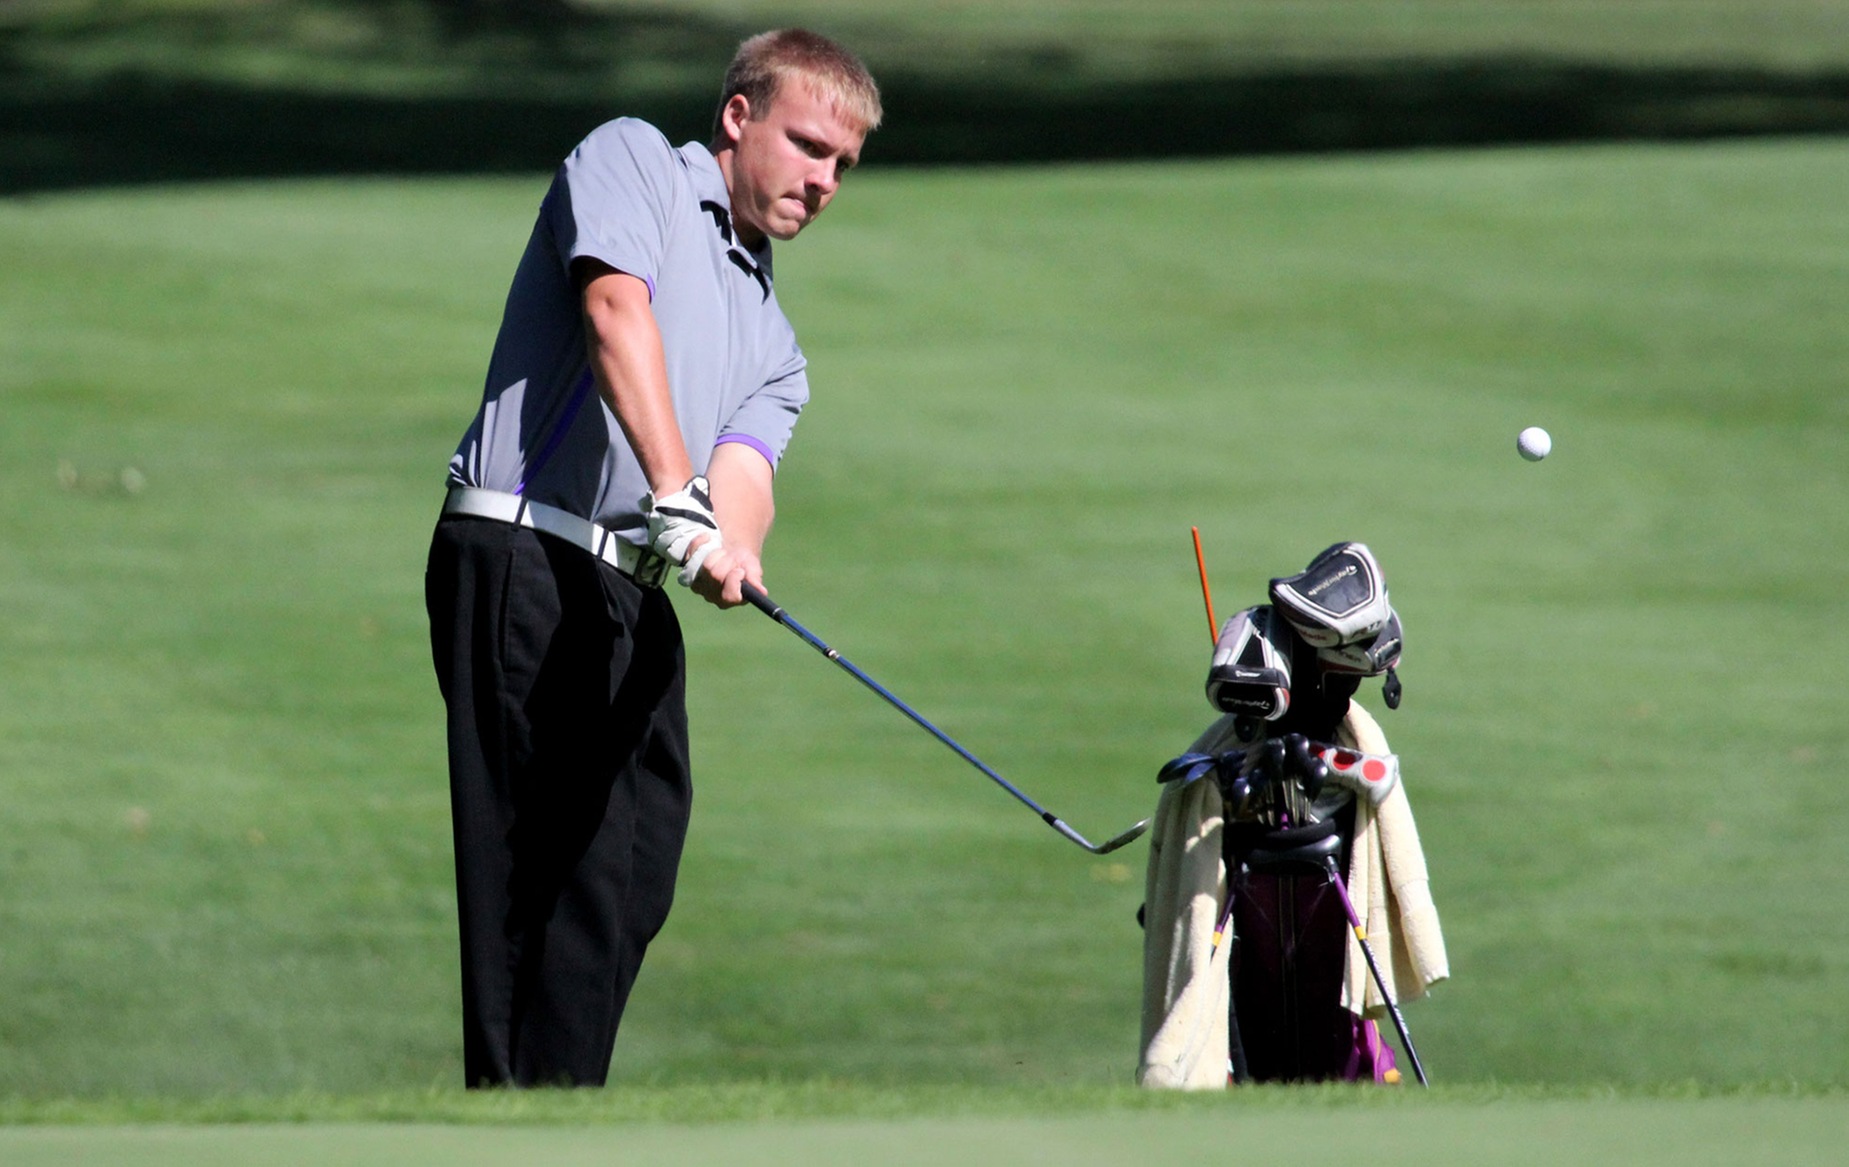 DC finishes tied for sixth at home invitational